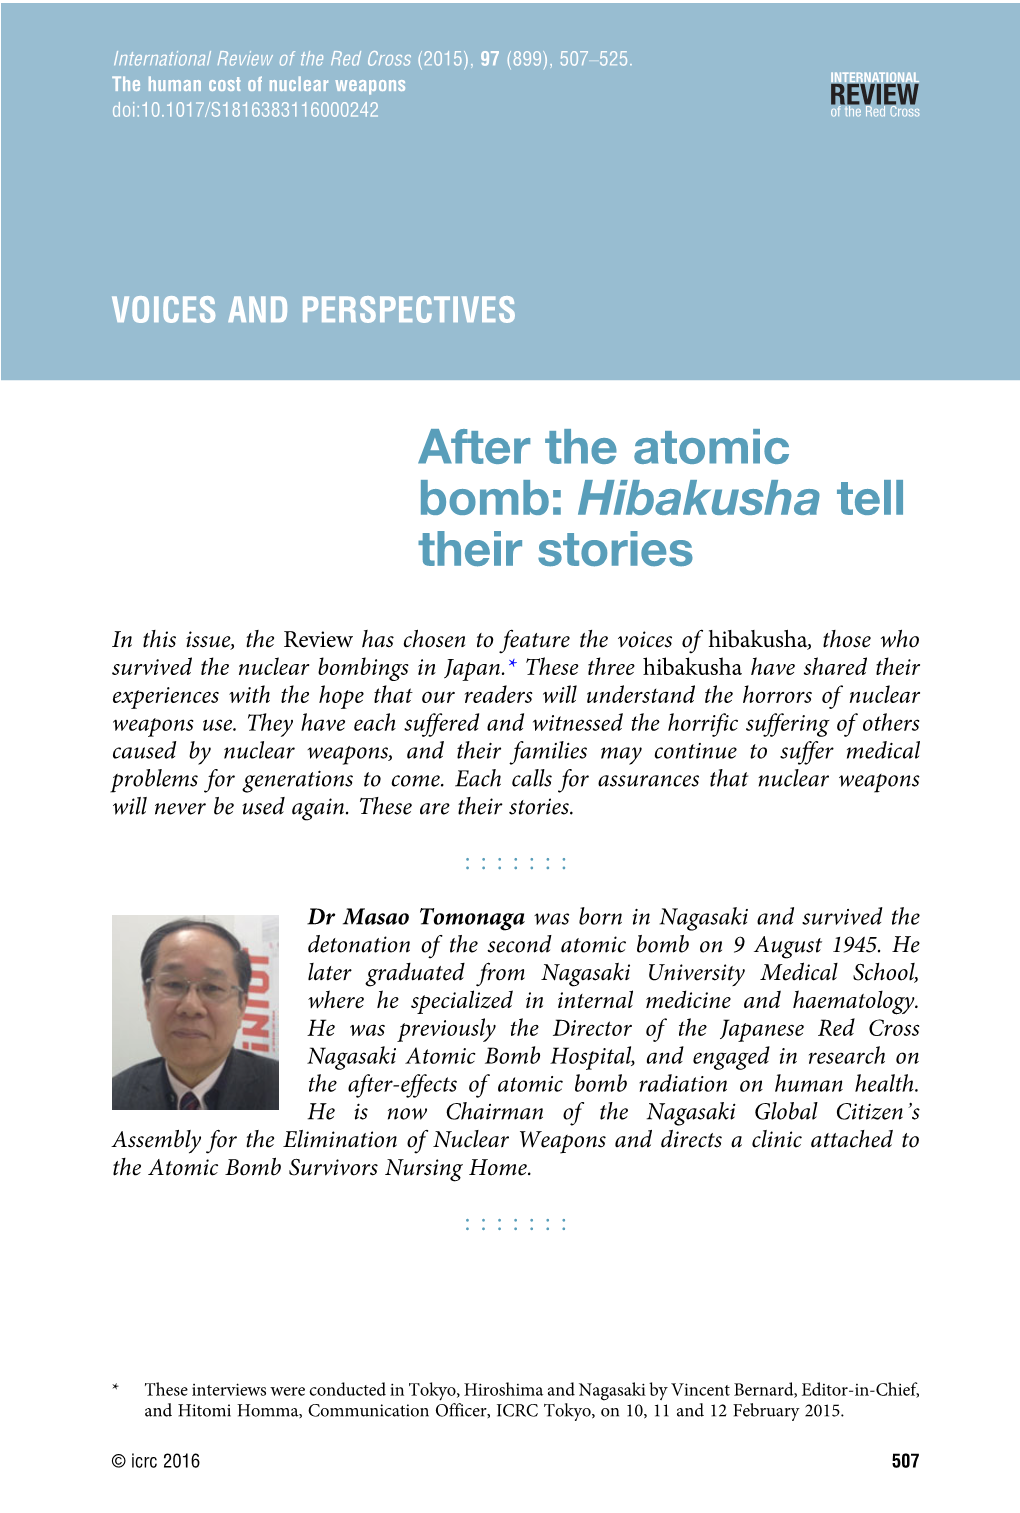 After the Atomic Bomb: Hibakusha Tell Their Stories